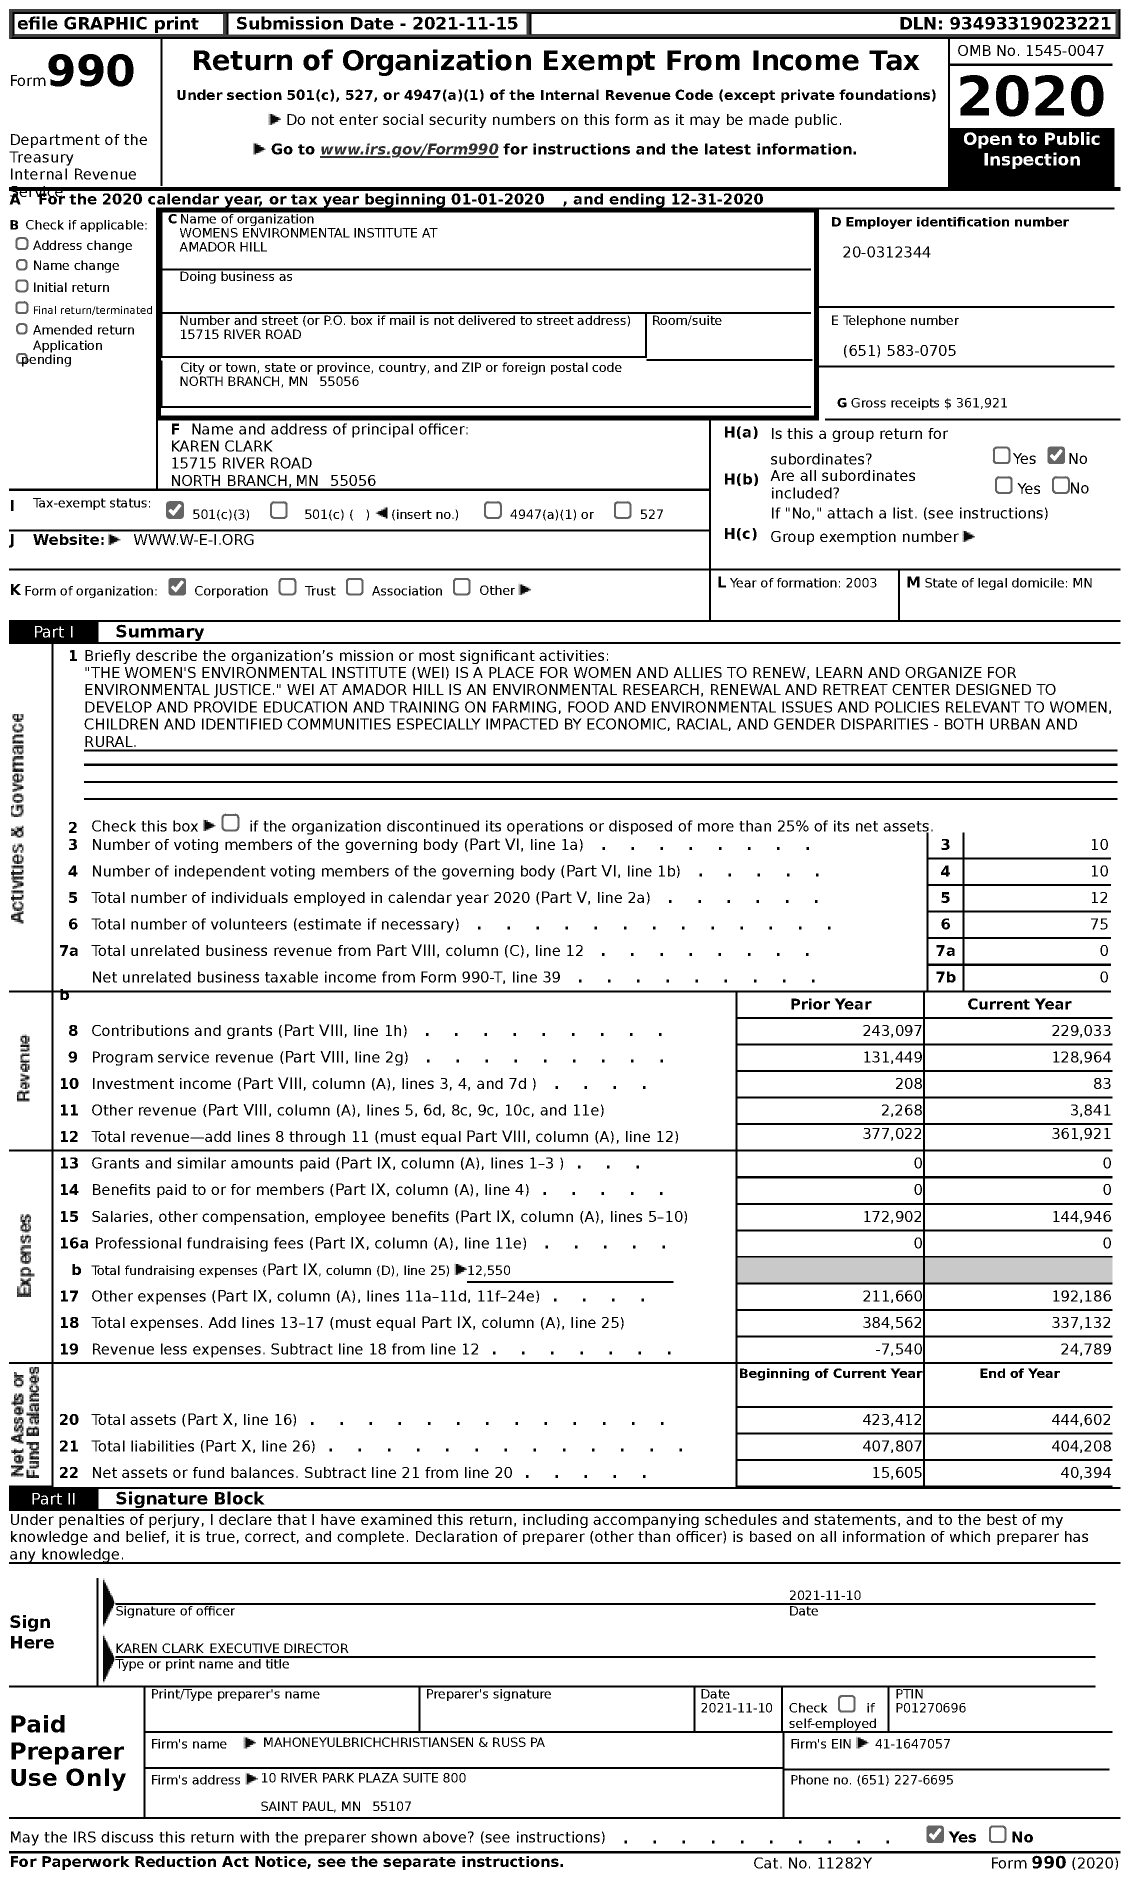 Image of first page of 2020 Form 990 for Womens Environmental Institute at Amador Hill